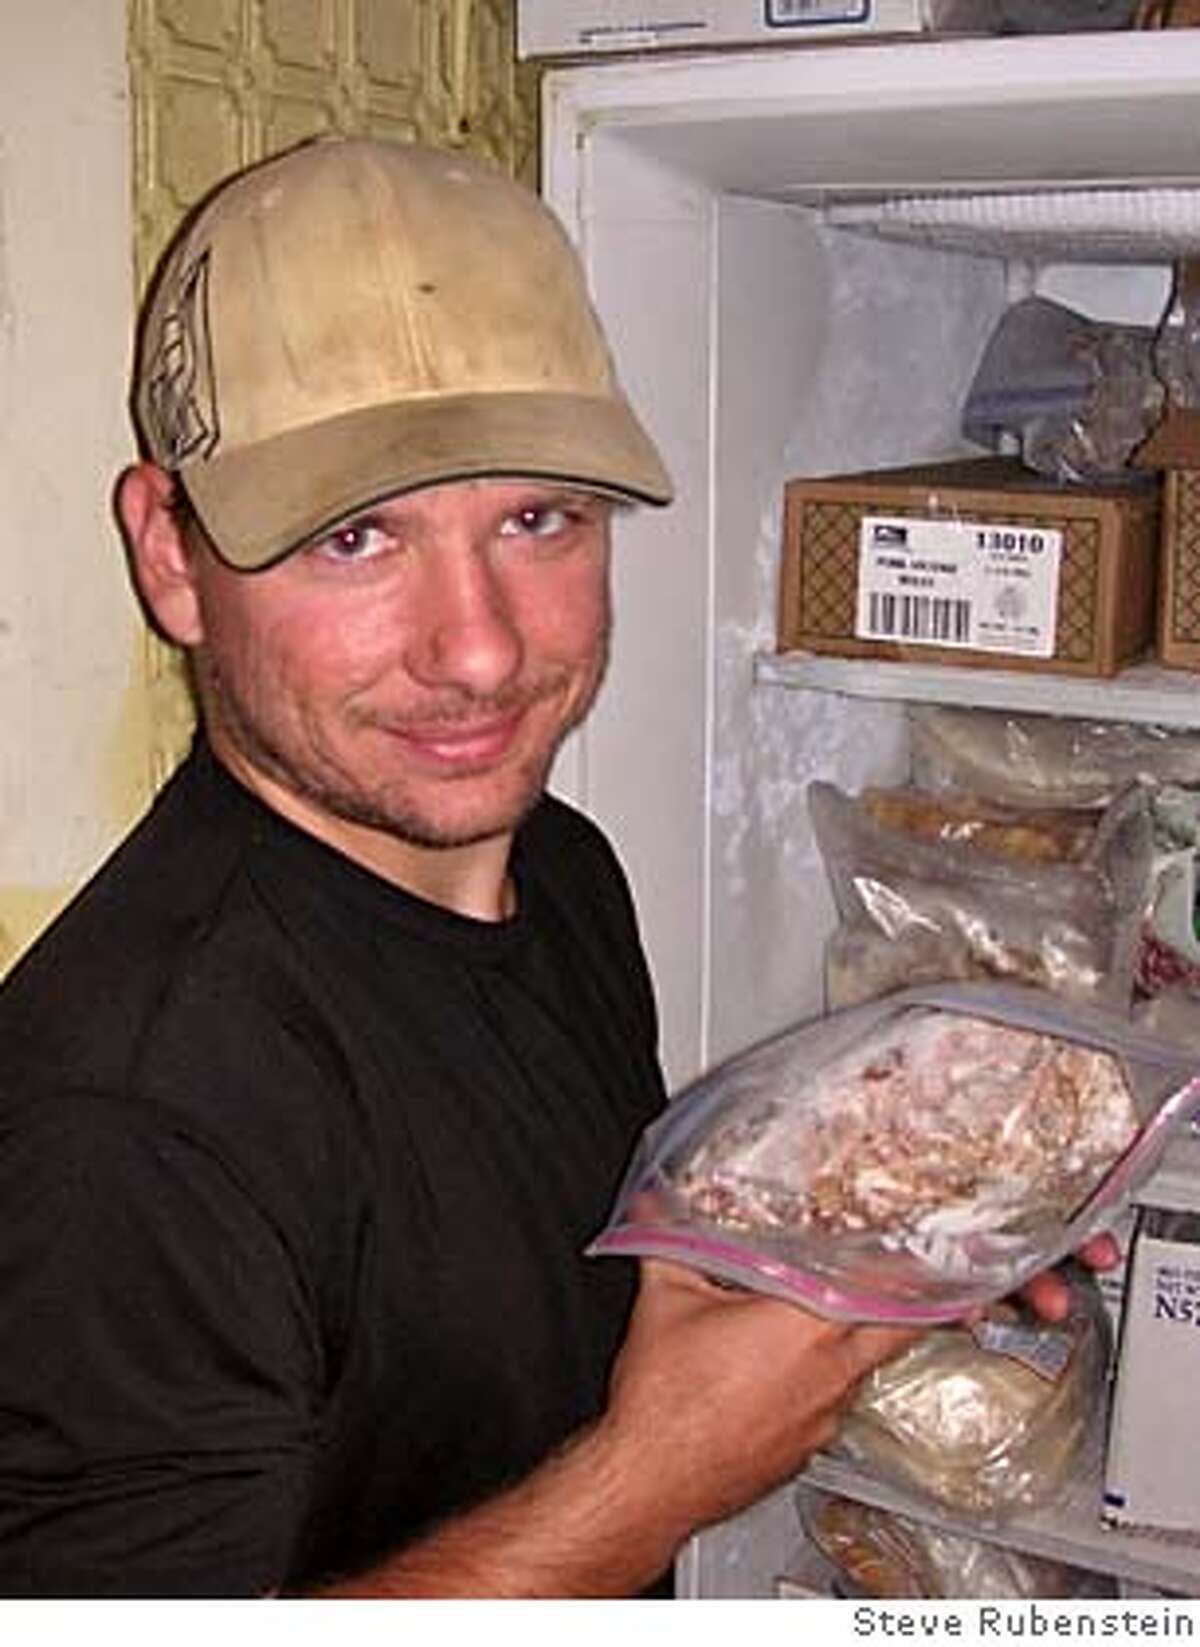 Holding a bag of frozen bull testicles in front of the freezer is Phil Fisher, bartender and testicle cook at the Ryegate Bar and Cafe in Ryegate MT, home of the annual, controversial testicle festival. Photo by Steve Rubenstein